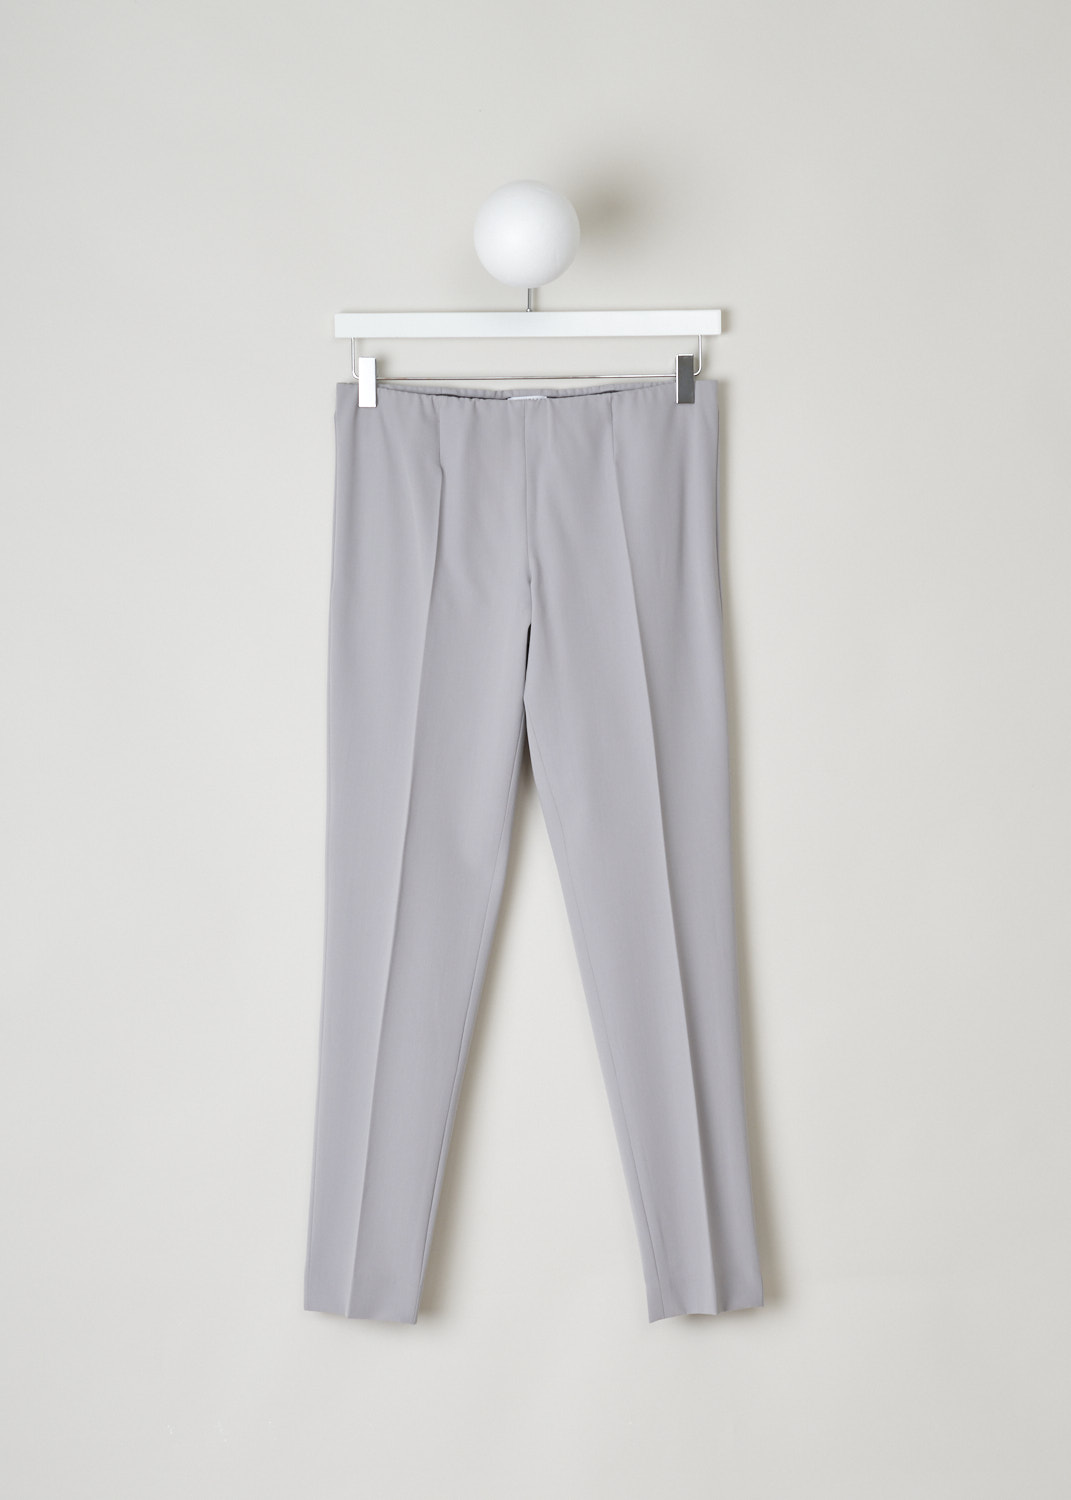 Brunello Cucinelli, Light grey pants with an elastic waist, MA051P1794_C2727, grey, front, Lovely light grey pants, make this beauty part your dailies. Comes without a waistband, but does has and elastic band for a comfy fit. 